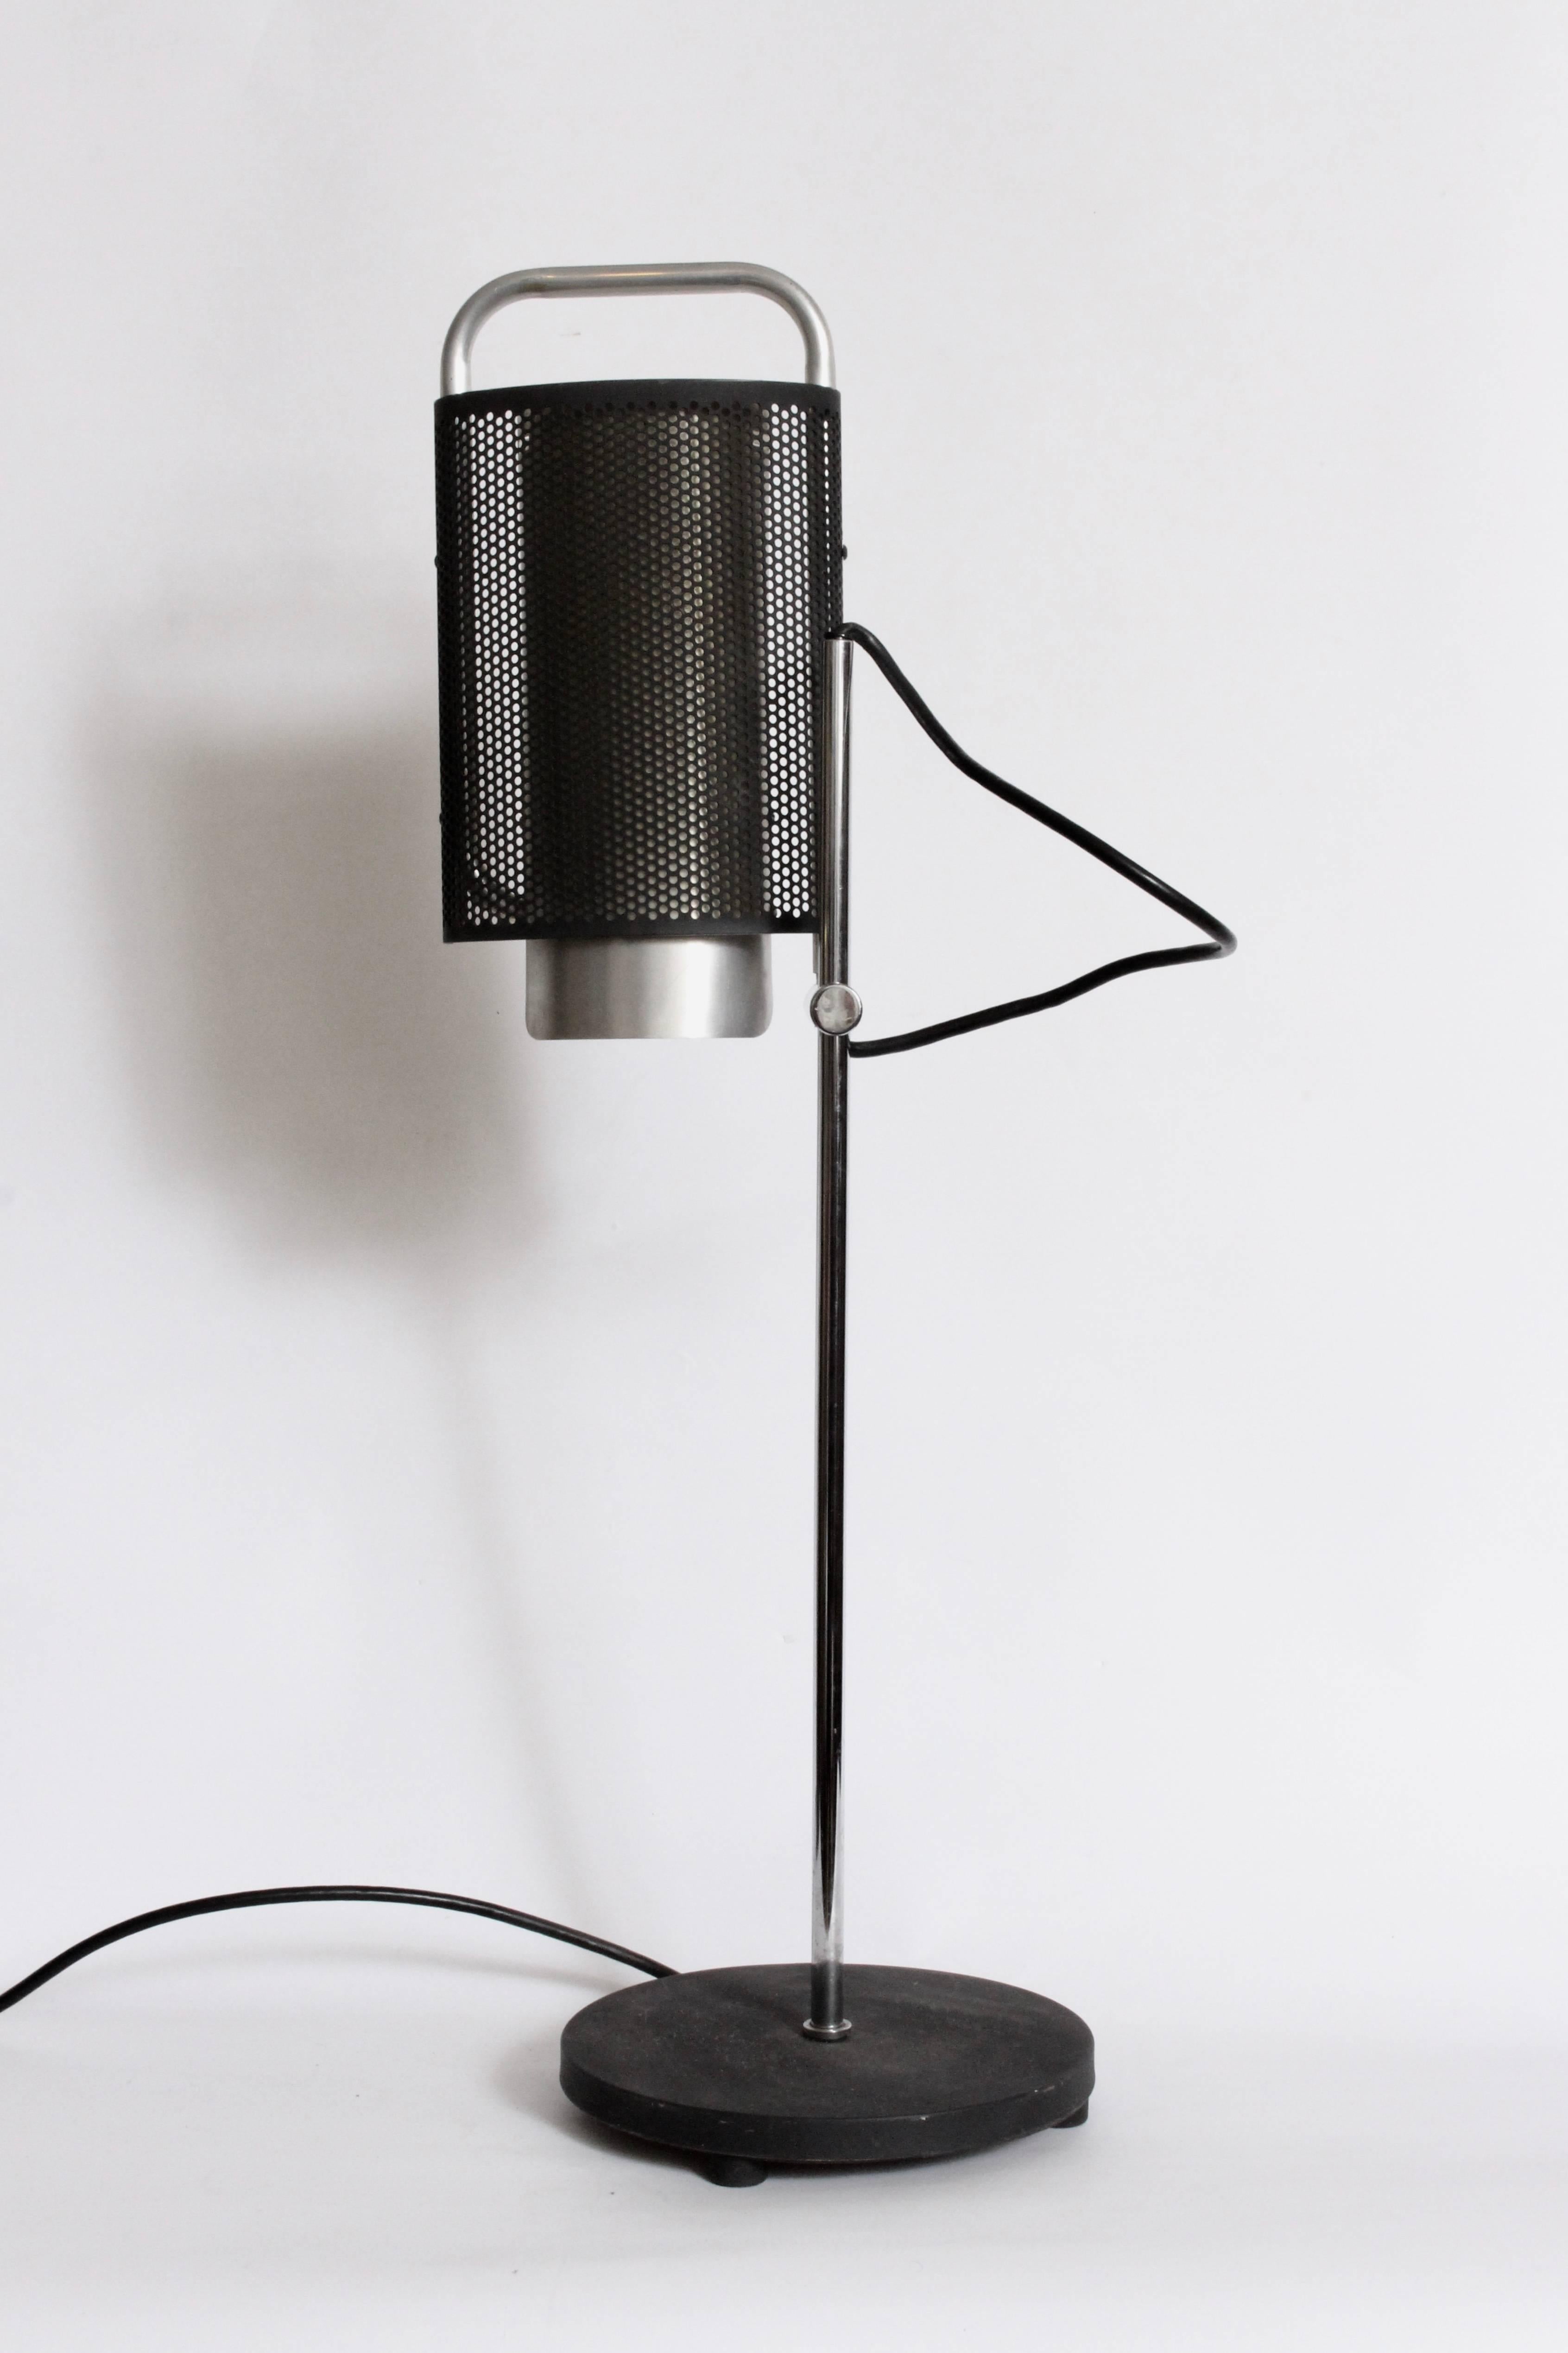 Modern George Nelson for Koch & Lowy Adjustable Perforated Aluminum & Black Enamel Table Lamp. Featuring a perforated Black enameled Aluminum cylinder mesh shade, Off White interior, articulating Chrome arm with round Black Iron base. Shade tilts